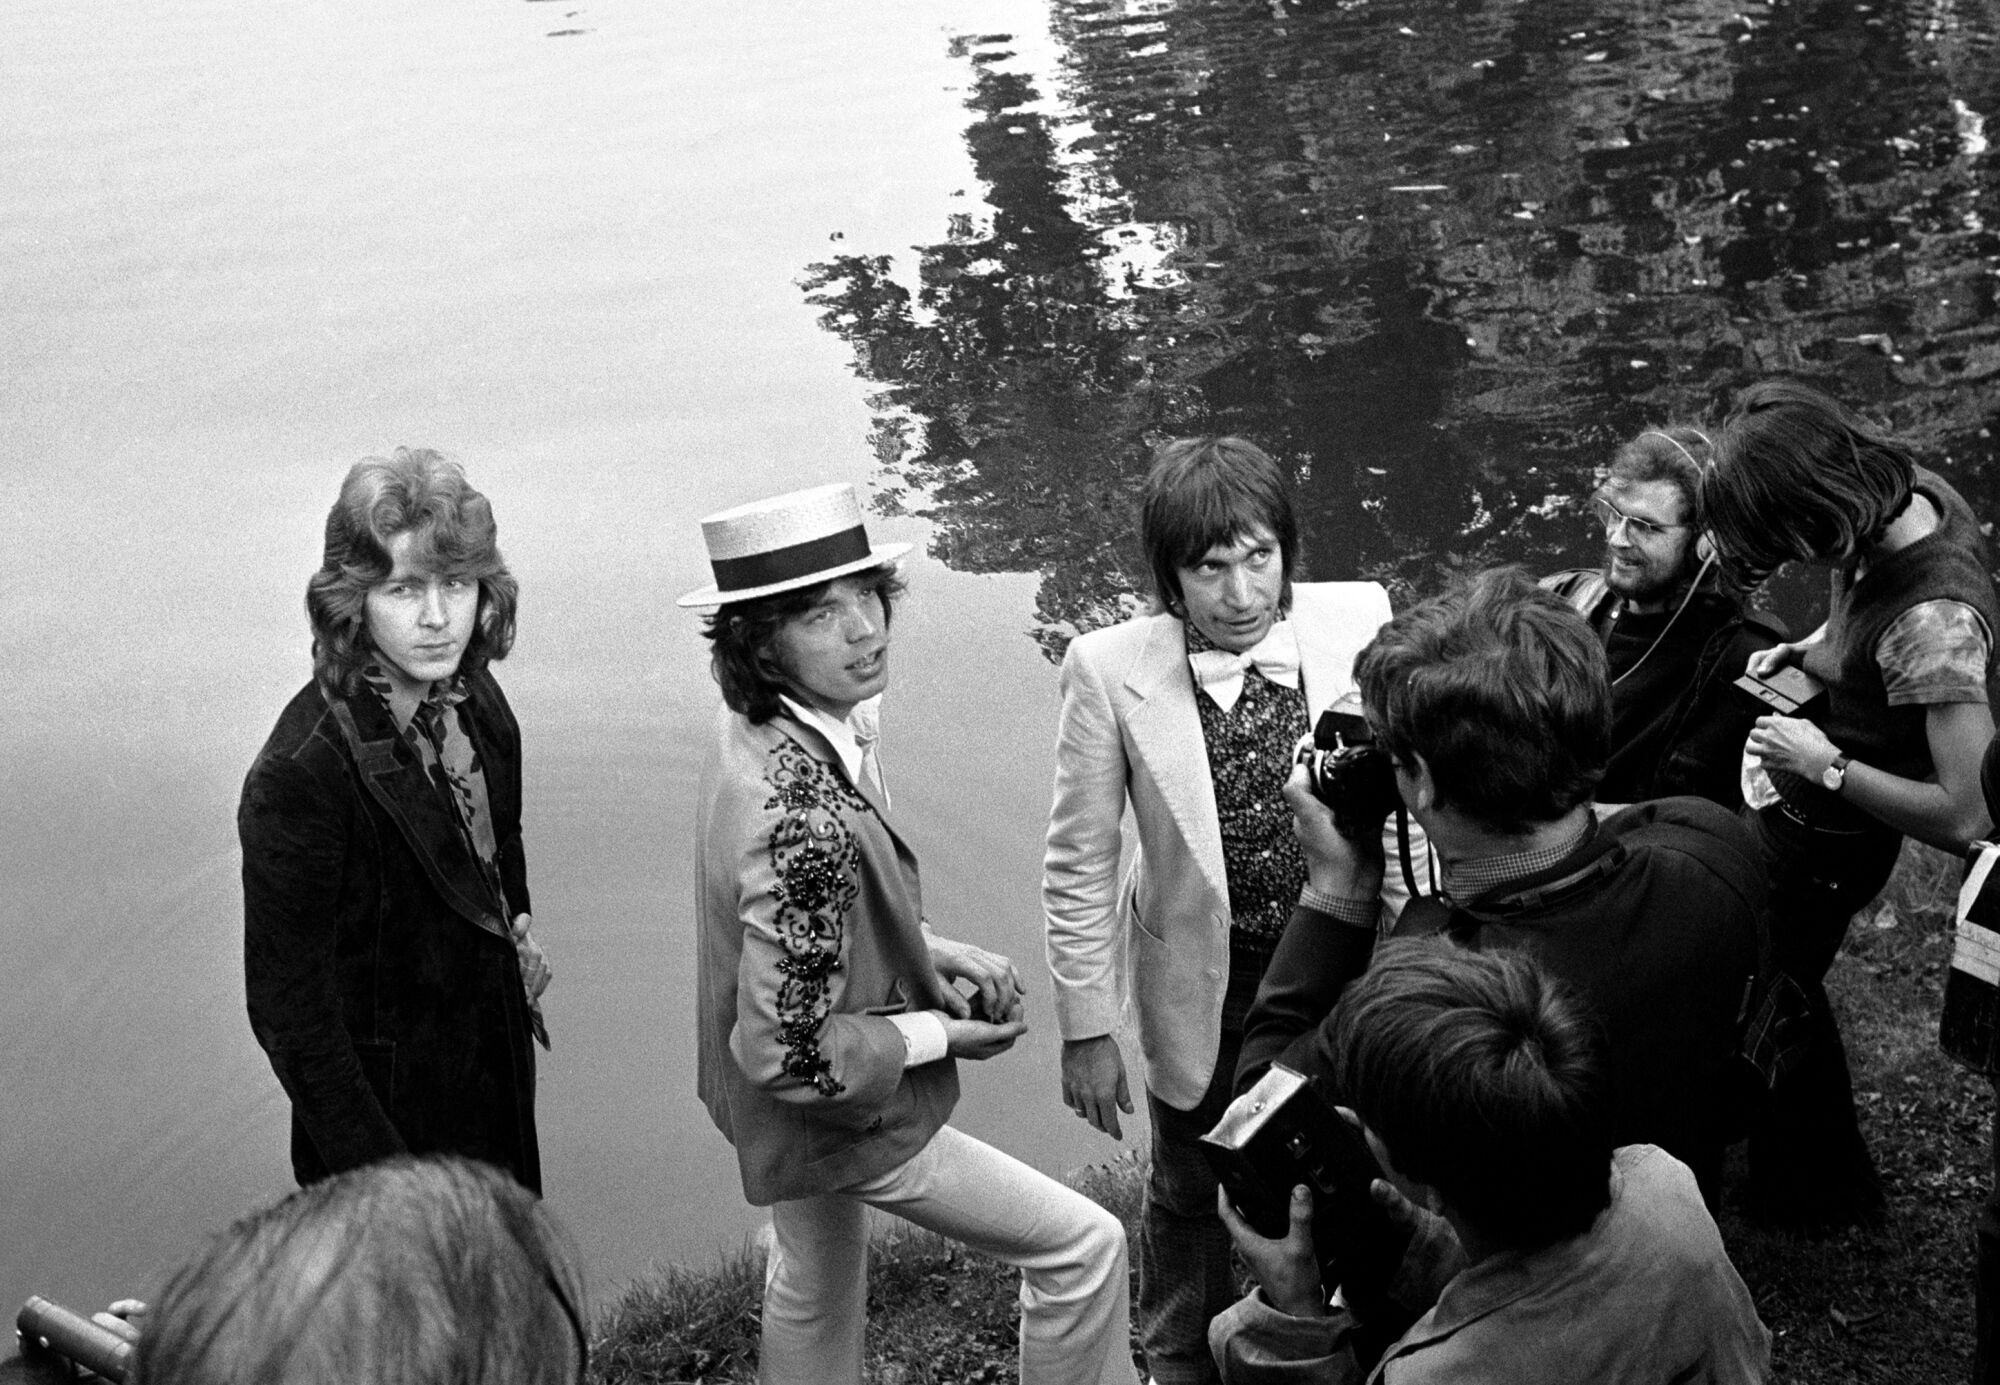 Mick Taylor, Mick Jagger and Charlie Watts hold a press conference at the Bois de Boulogne in Paris in 1972.